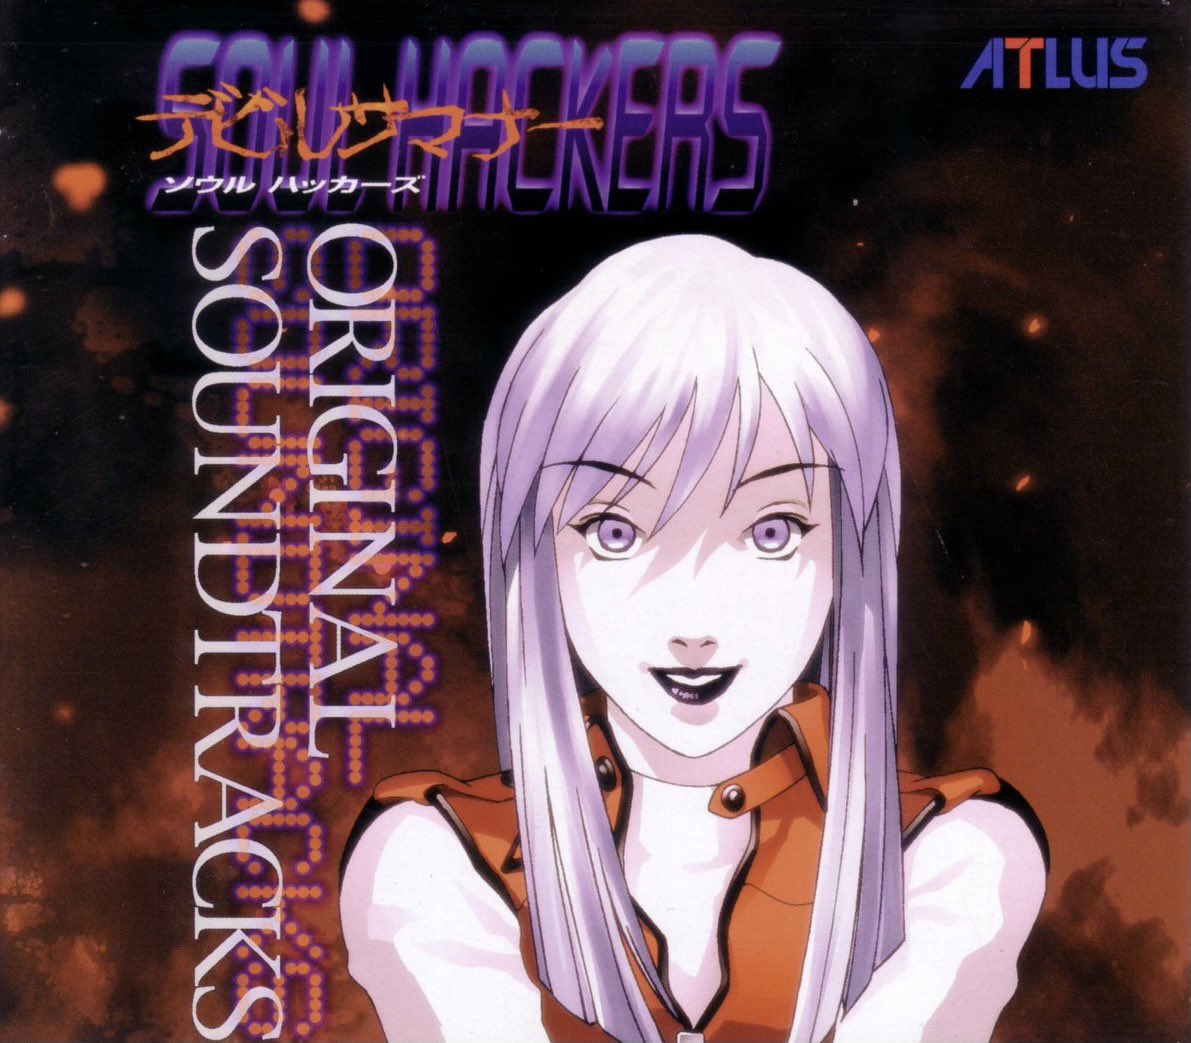 the plot in soul hackers is really cool to me, the cyberpunk aesthetic, the gradual buildup throughout the story and the overall 90’s feel to it. I loved how it built up from you just fighting the Phantom Society to fighting a threat to your town and possibly the whole world